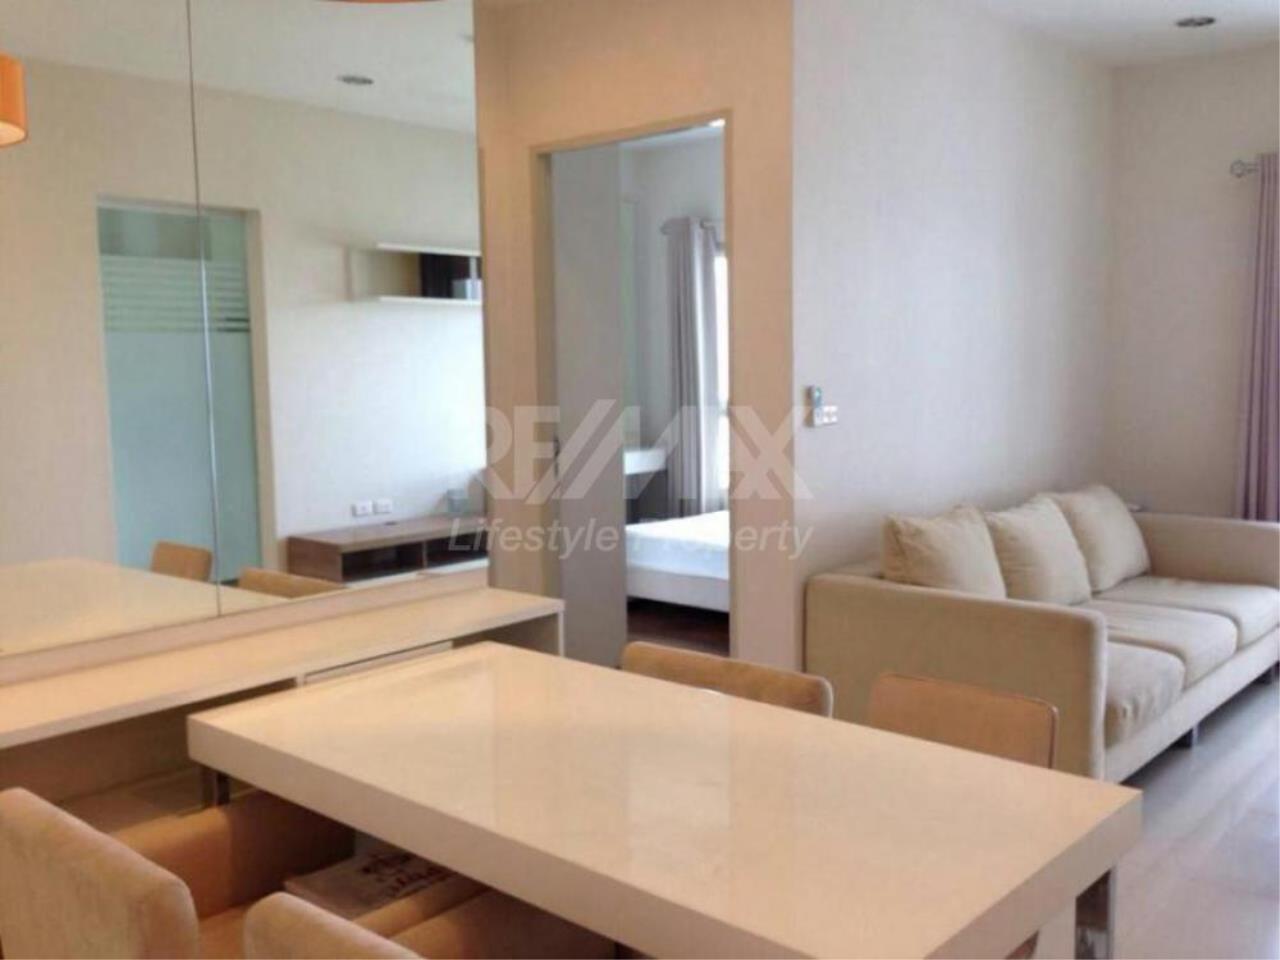 RE/MAX LifeStyle Property Agency's Q. House Condo Sathorn 7